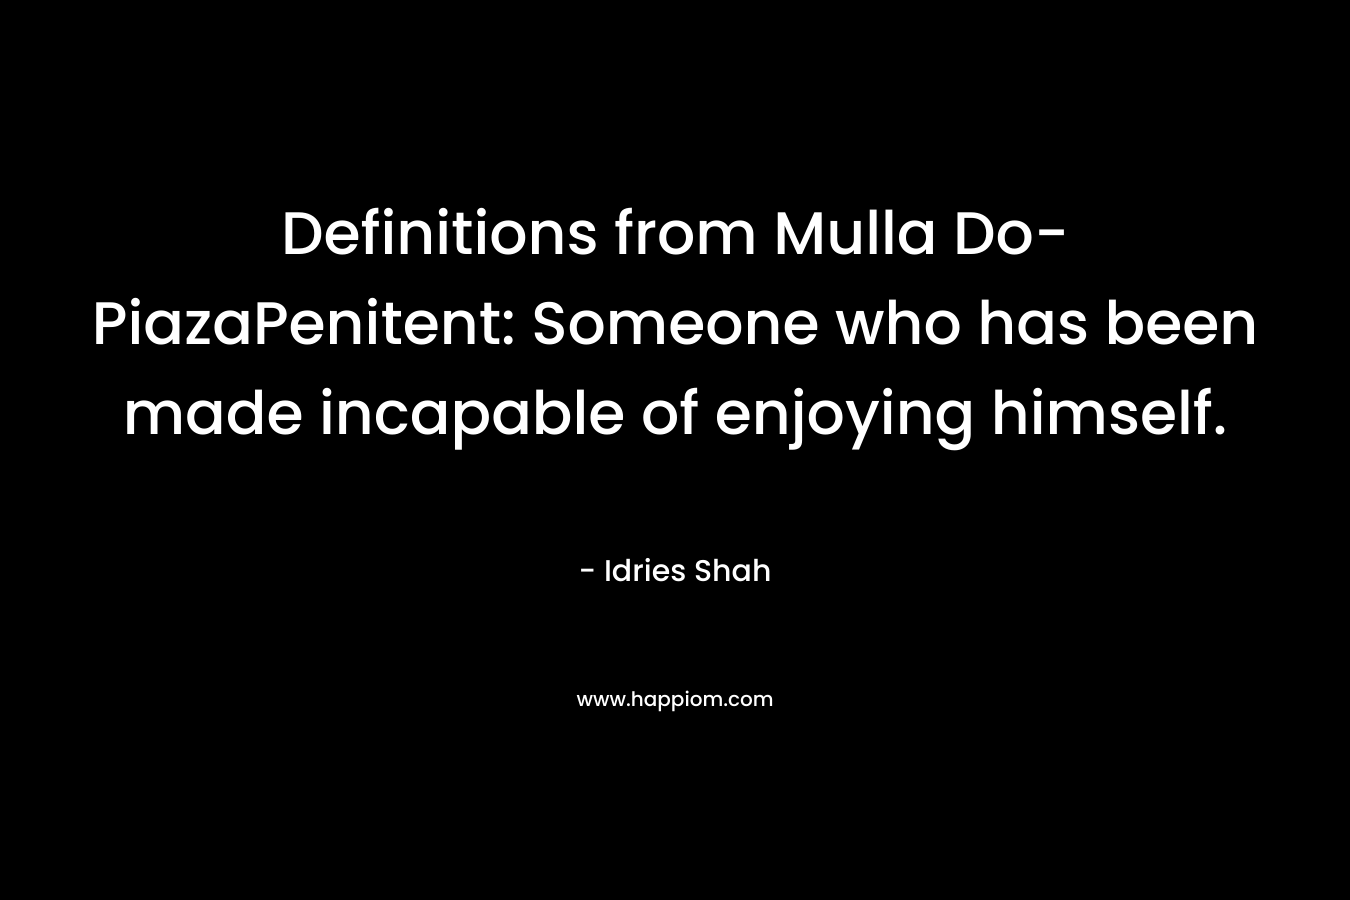 Definitions from Mulla Do-PiazaPenitent: Someone who has been made incapable of enjoying himself.